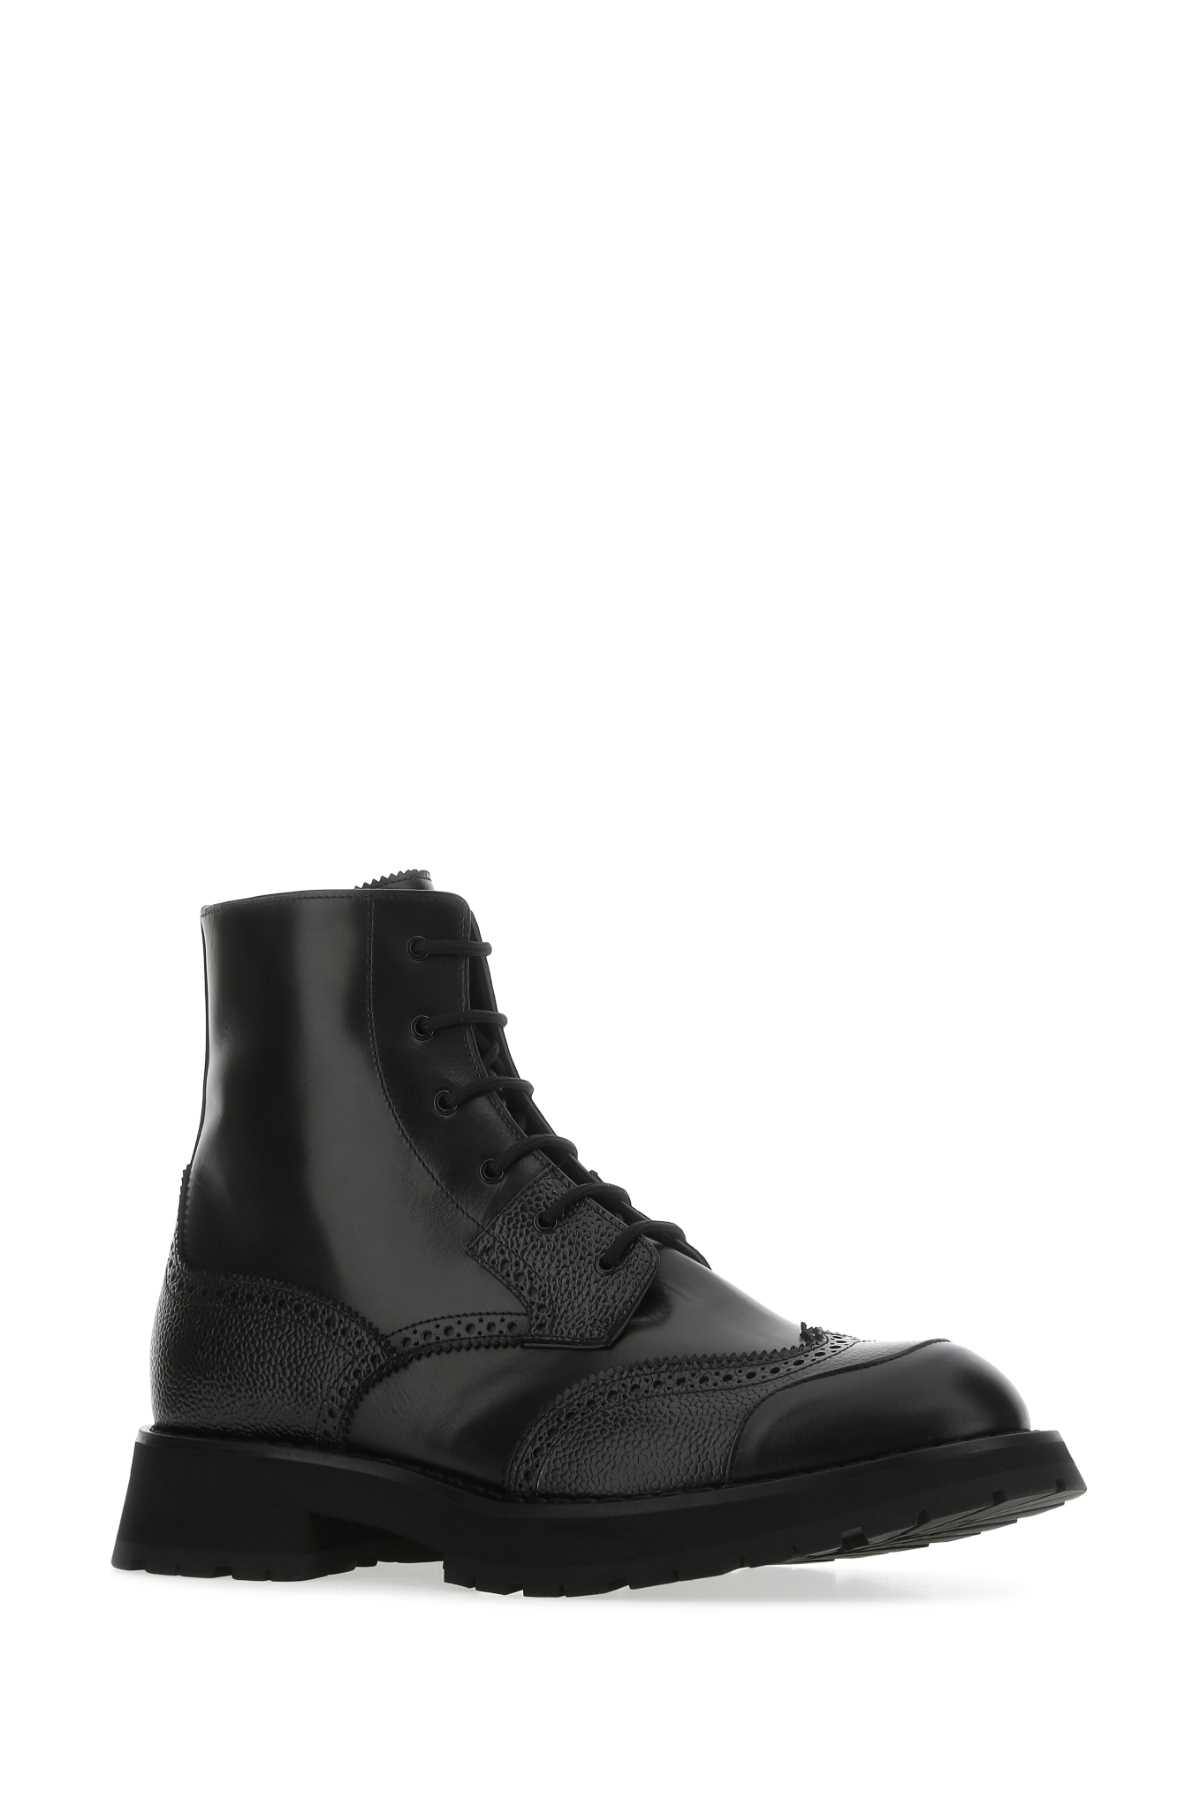 ALEXANDER MCQUEEN BLACK LEATHER PUNK WORKER ANKLE BOOTS